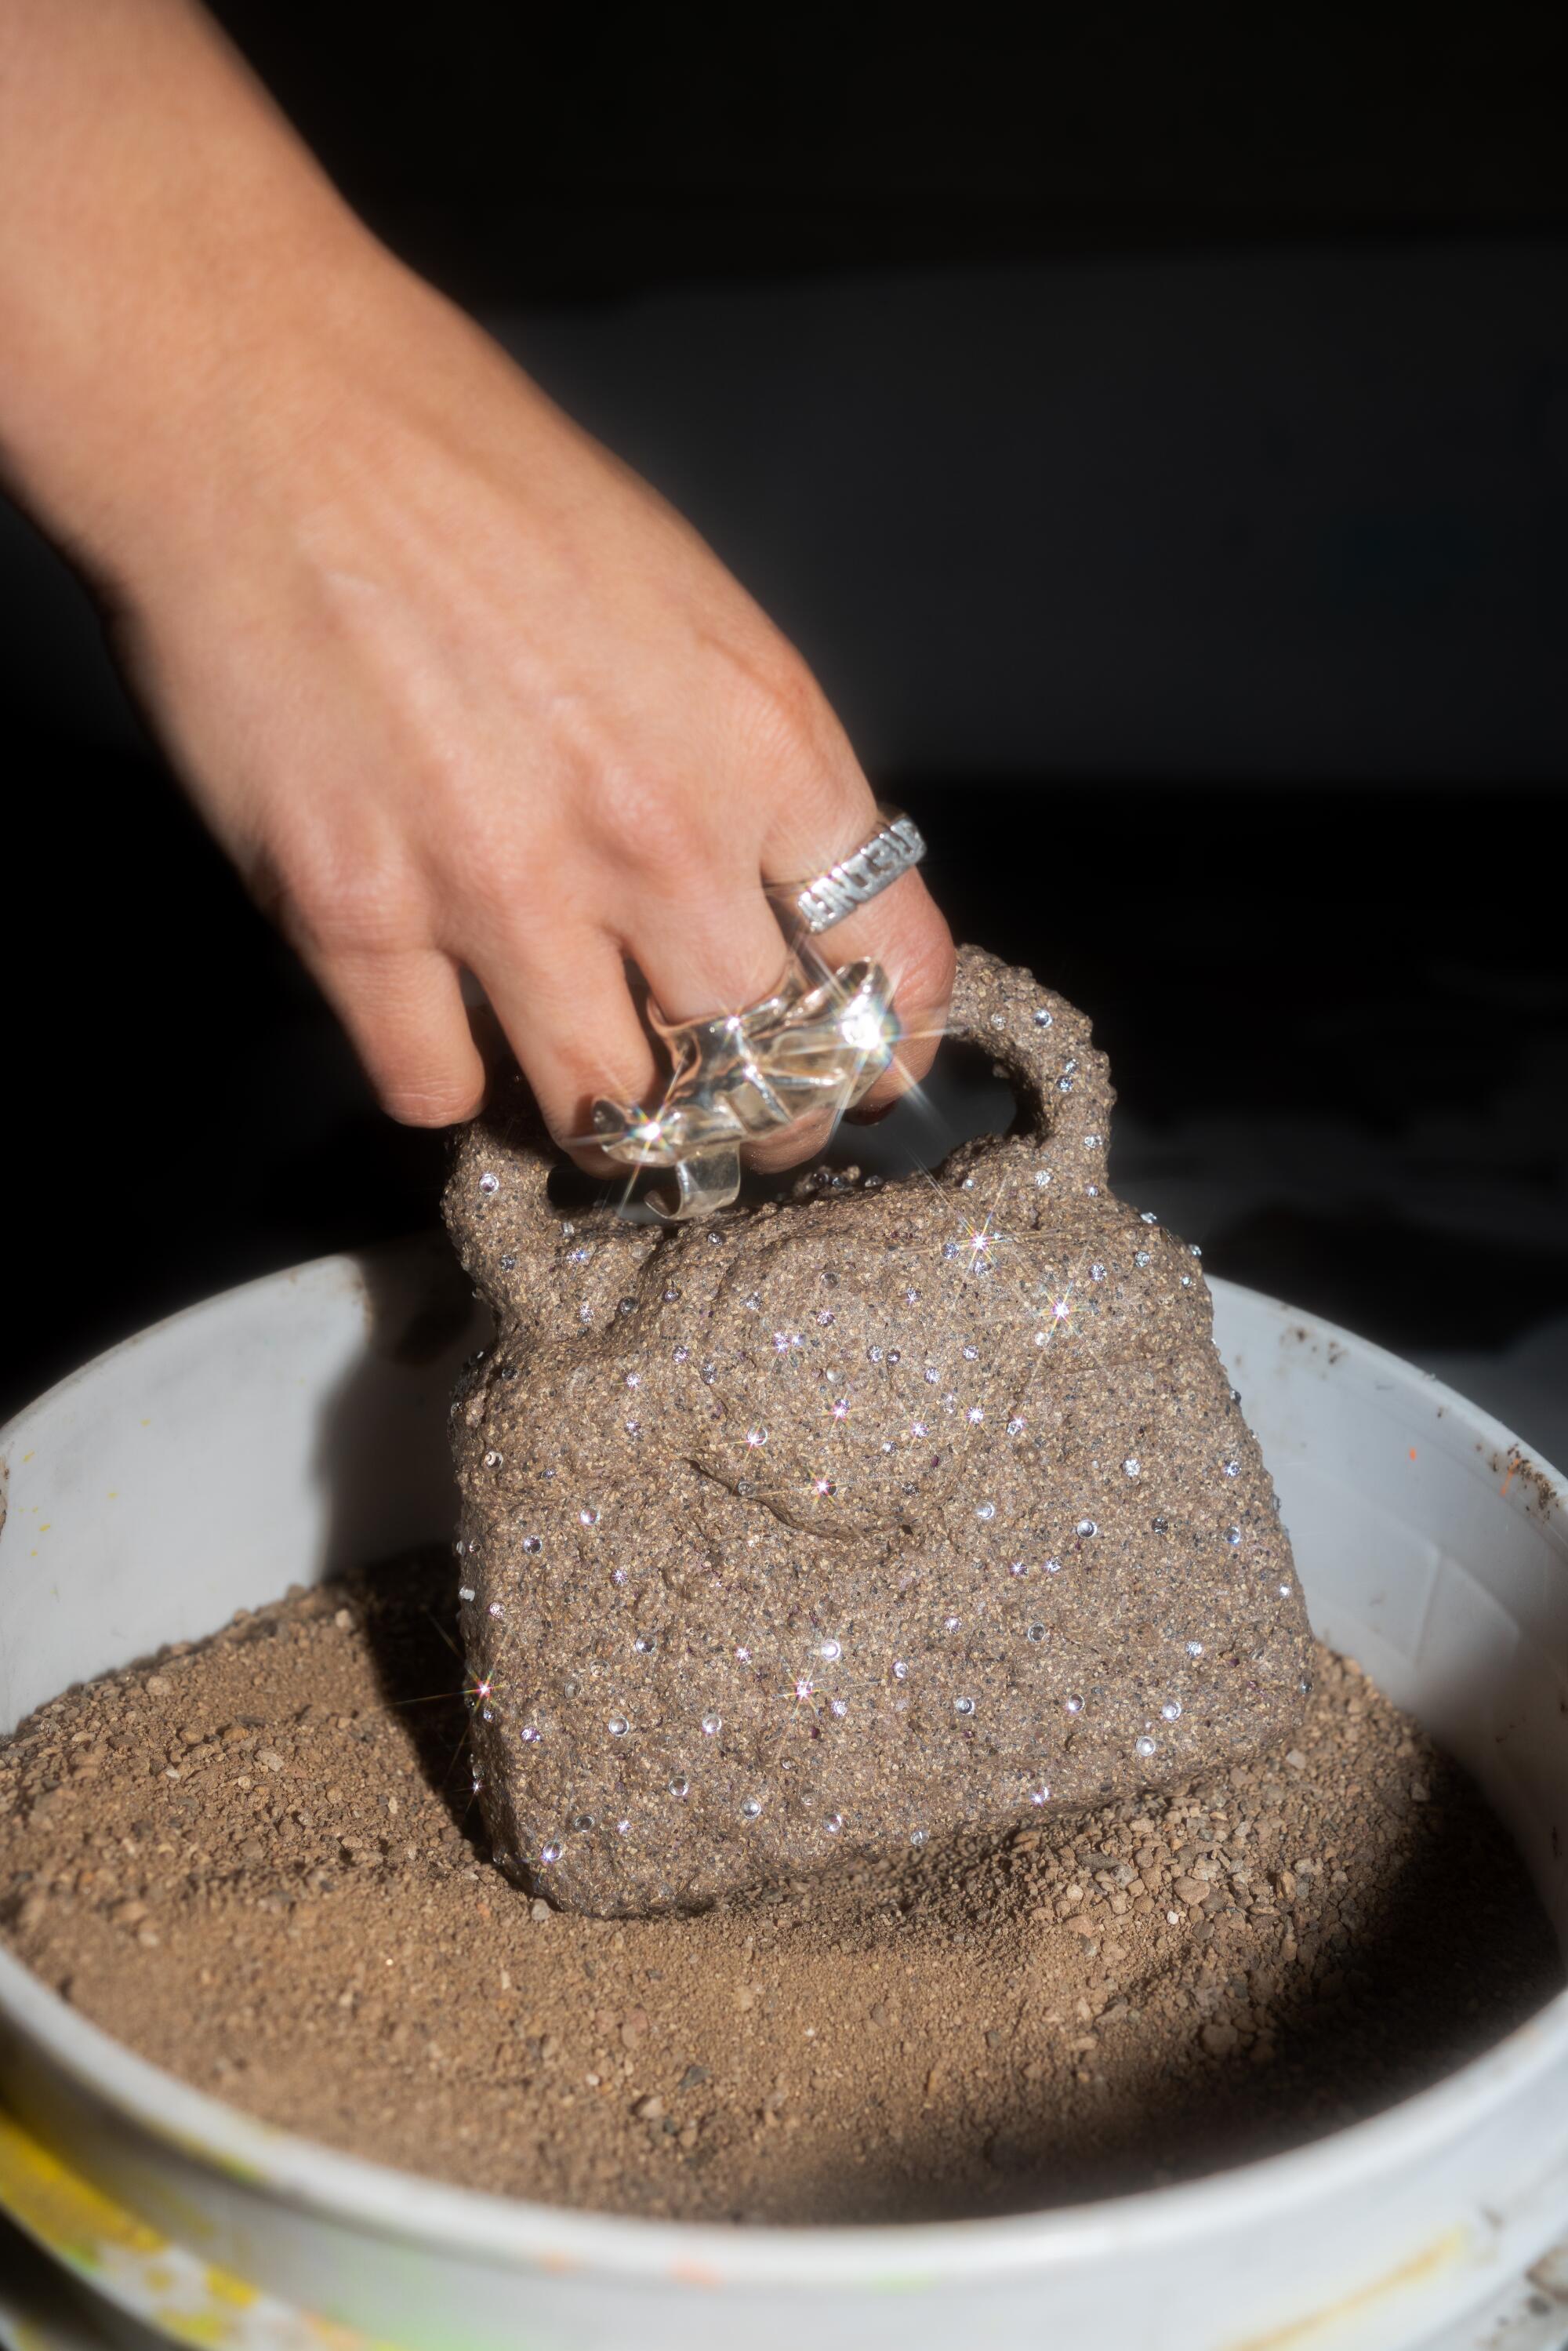 A plastic purse encrusted with gravel and cubic zirconia.